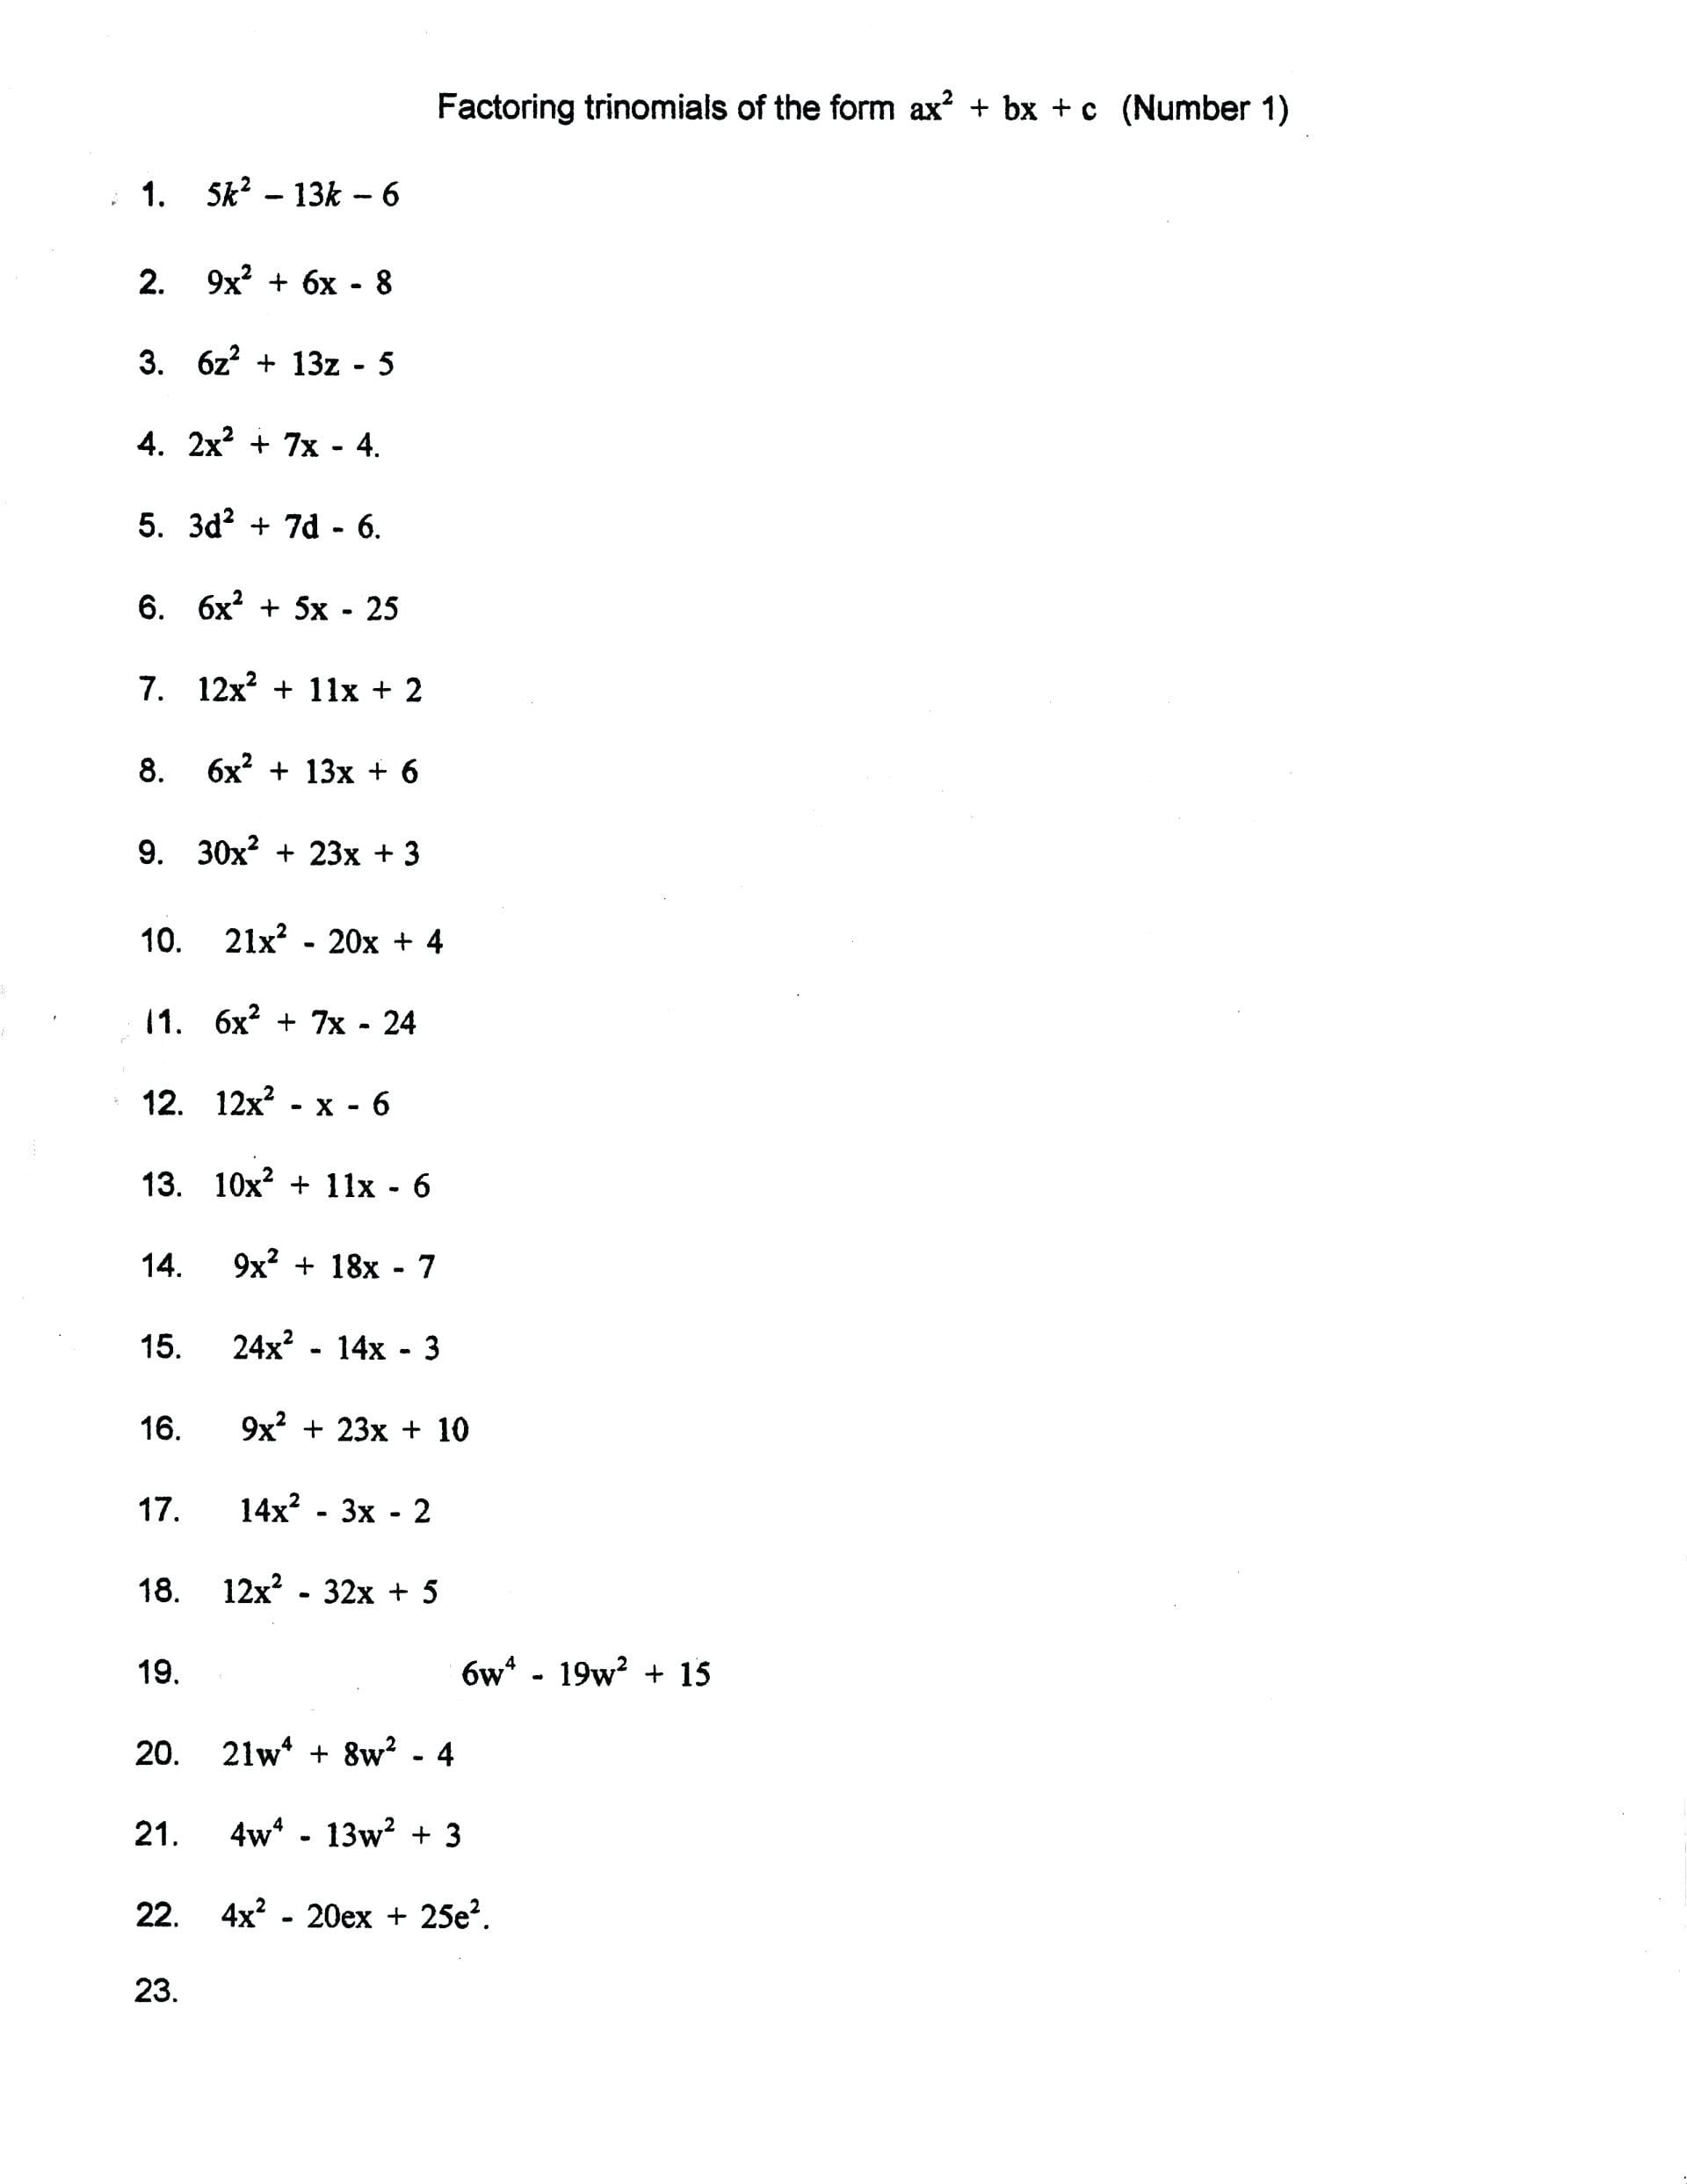 Factoring Polynomials Worksheet With Answers Algebra 2 — db-excel.com